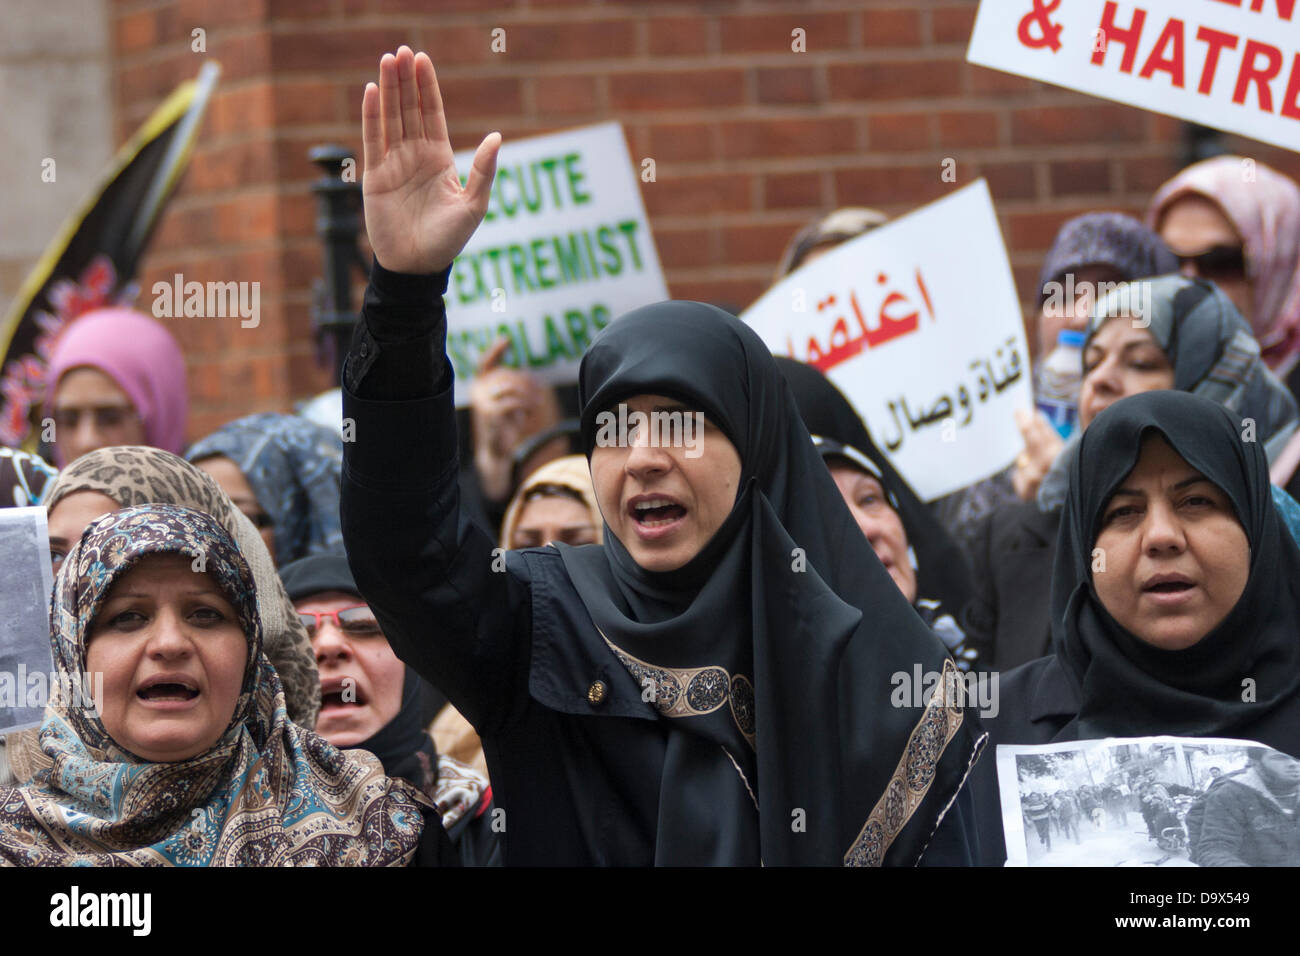 London, UK. 27th June 2013. A Muslim woman chants slogans as Egyptians in London protest against sectarian killings in Egypt. Credit:  Paul Davey/Alamy Live News Stock Photo